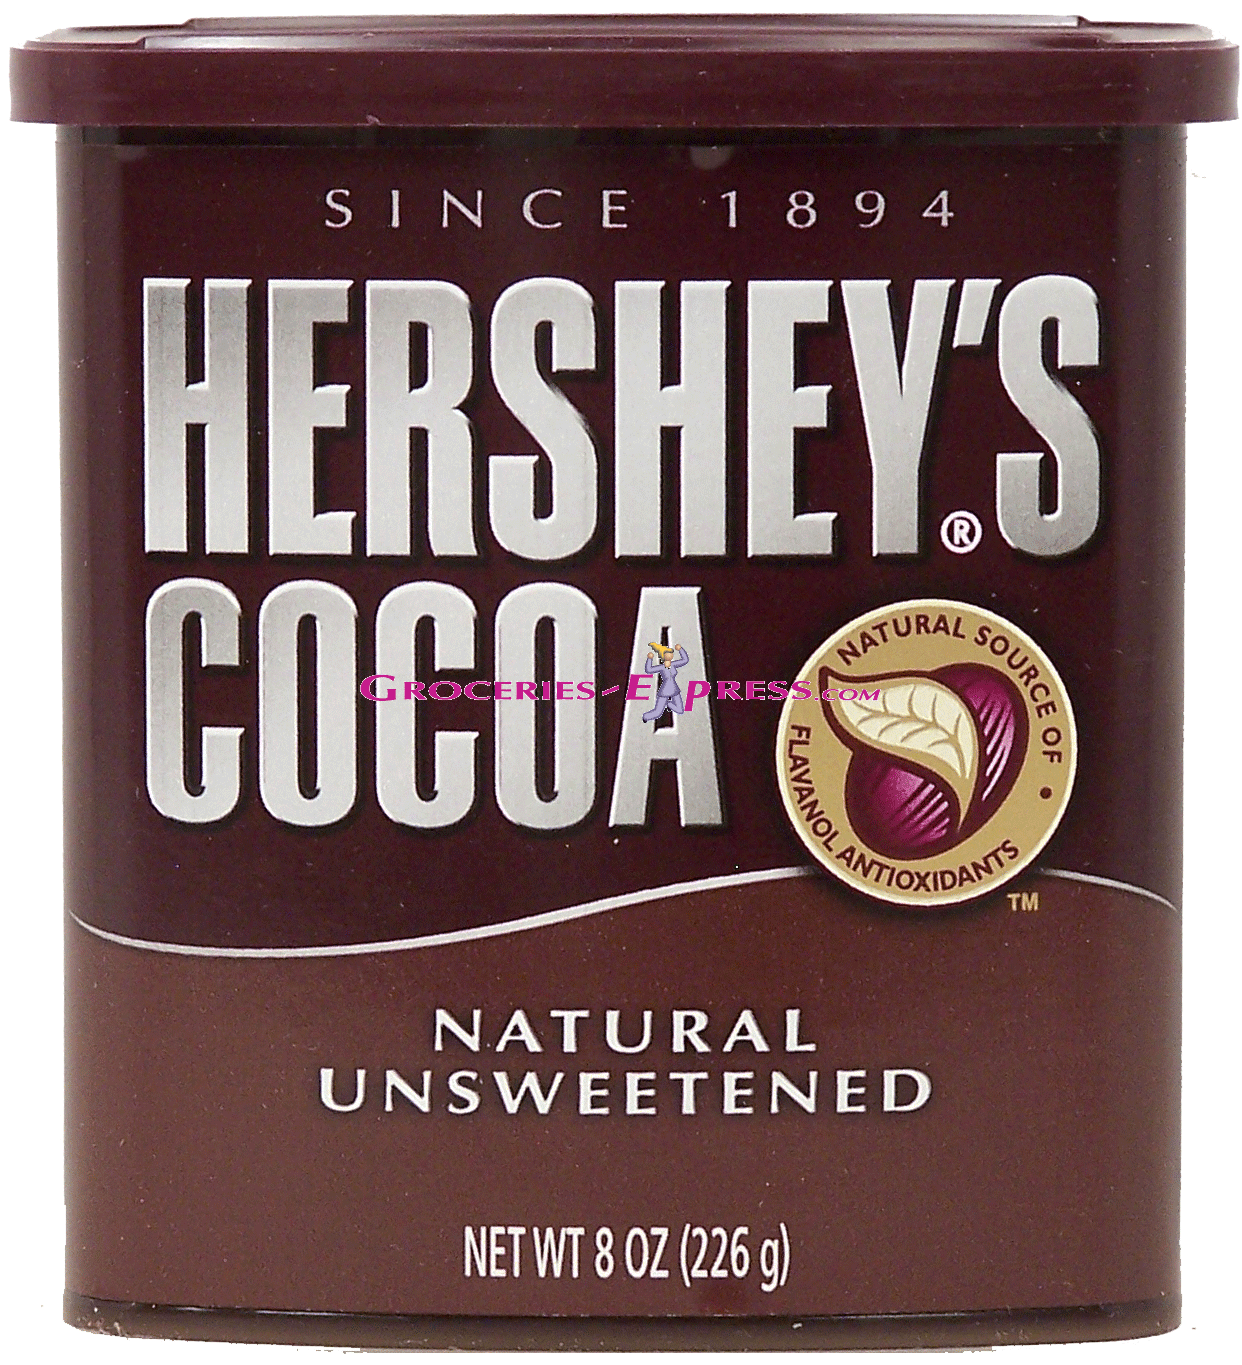 Hershey's Cocoa natural unsweetened cocoa Full-Size Picture